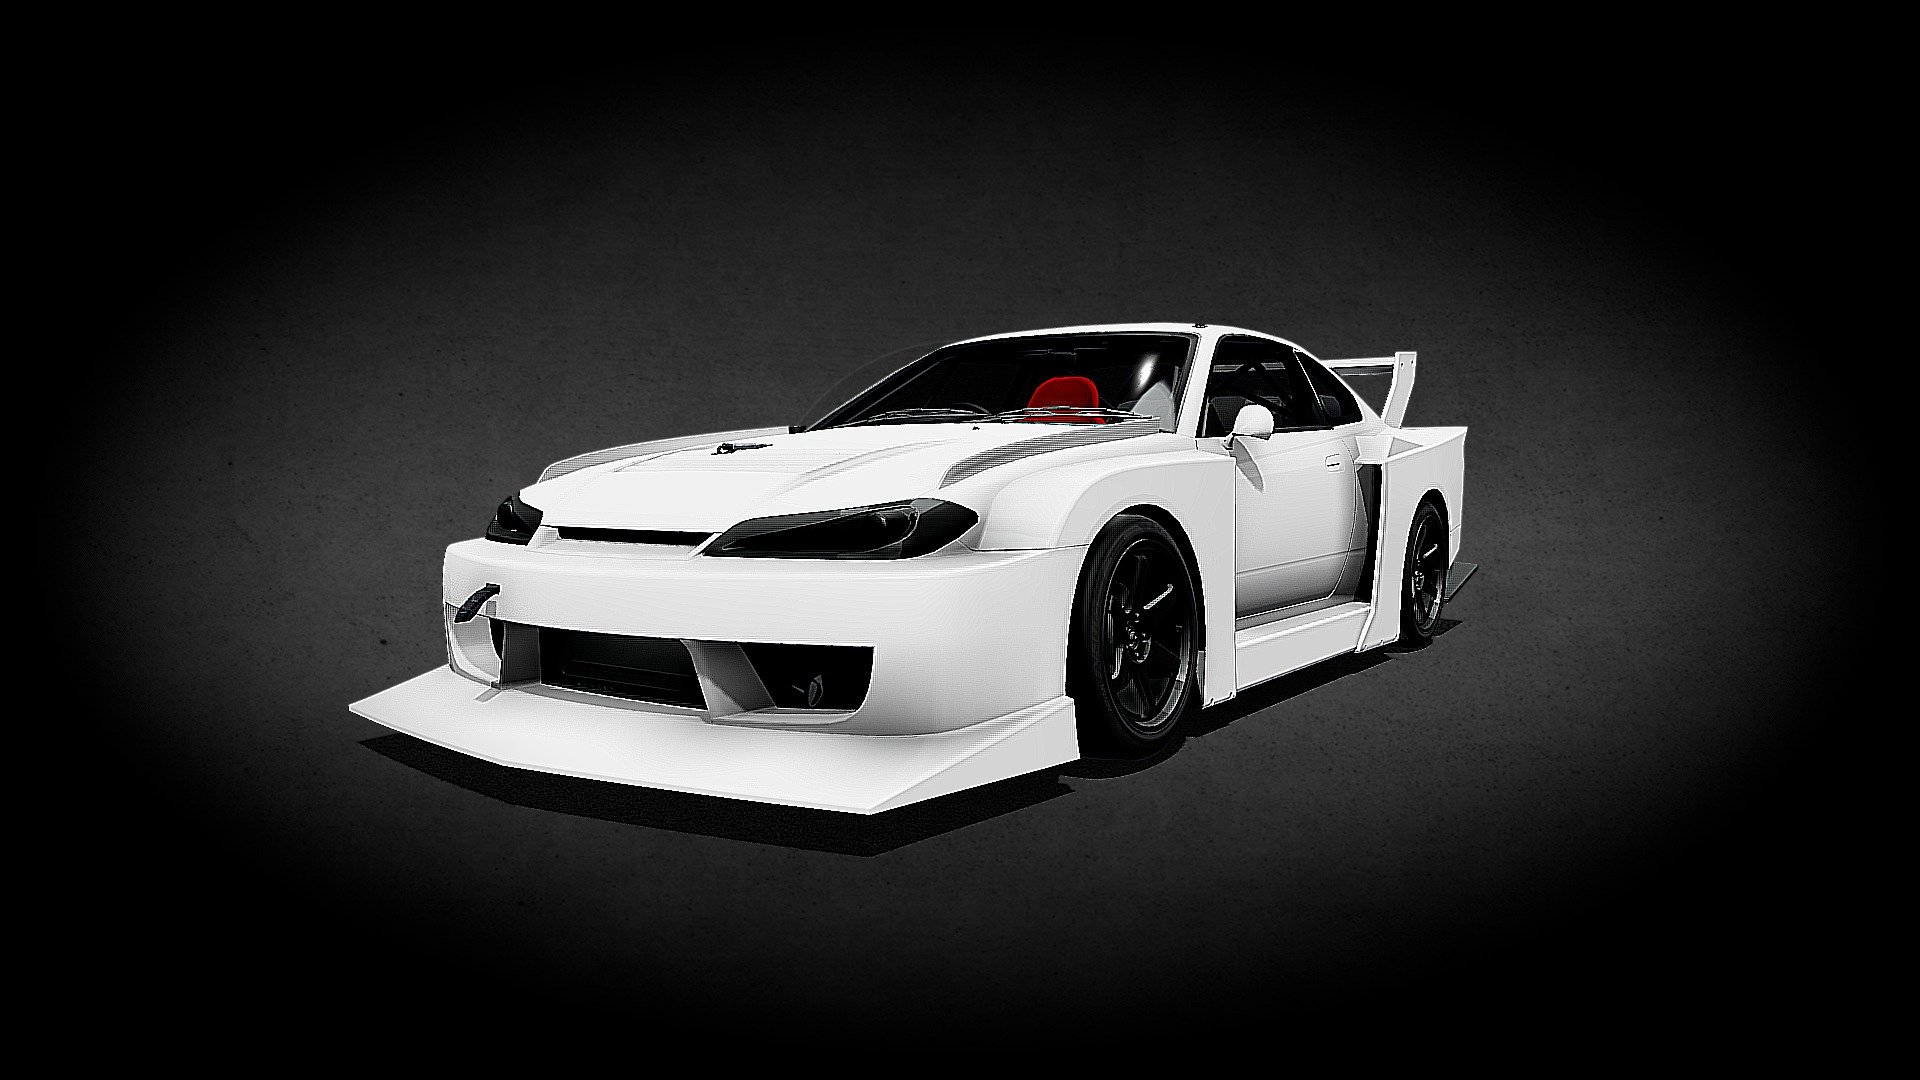 The widebody wizards at Liberty Walk have done it again, and this time the subject is the S15 Nissan Silvia. Called the LB-Super Silhouette S15, the name is fitting, as it’s a direct callback to the Nichira Silvia Group 5 race car of the 1980s. Now, it’s aura has been resurrected as a monster drift machine.The original Nichira Silvia was driven by Kazuyoshi Hoshino, one of the three famed Nissan Super Silhouette race cars of the 80s. Along with its comrades, the red and black DR30 Skyline and Coca-Cola Bluebird, these cars inspired a generation of kaido racers with their angular aero kits and massive wings. Wataru Kato of Liberty Walk was very much of this generation, and he’s already paid tribute to the Skyline with a widebody kit for the R34 Skyline GT-R.There’s lineage in the LB S15, as the original Nichira racer was based on an S110 Silvia. When the S12 Silvia debuted, Nissan rebodied the race car with an S12 face 3d model